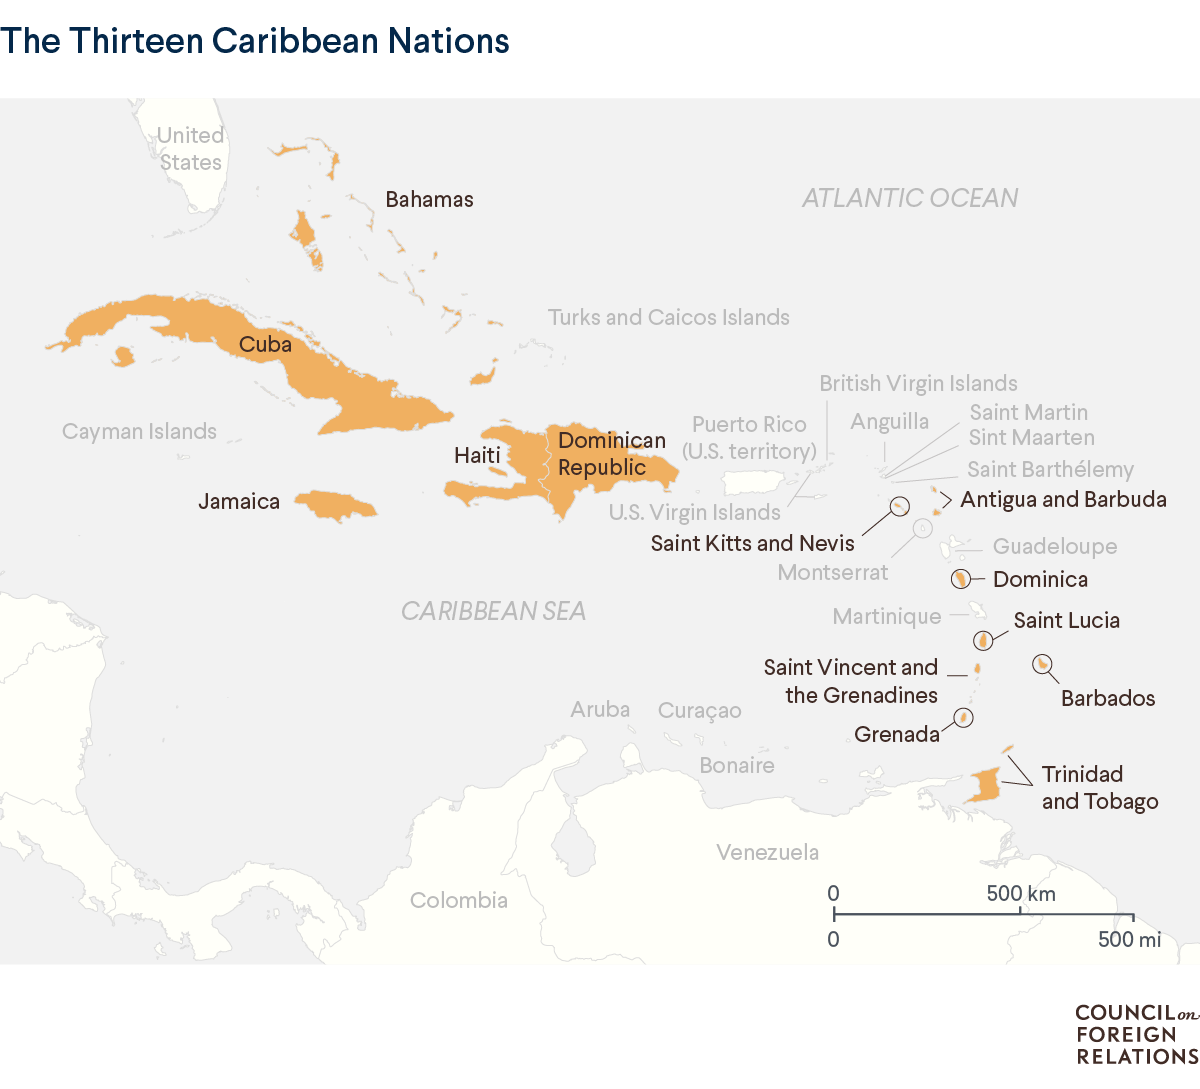 A map of the Caribbean highlighting the thirteen Caribbean nations